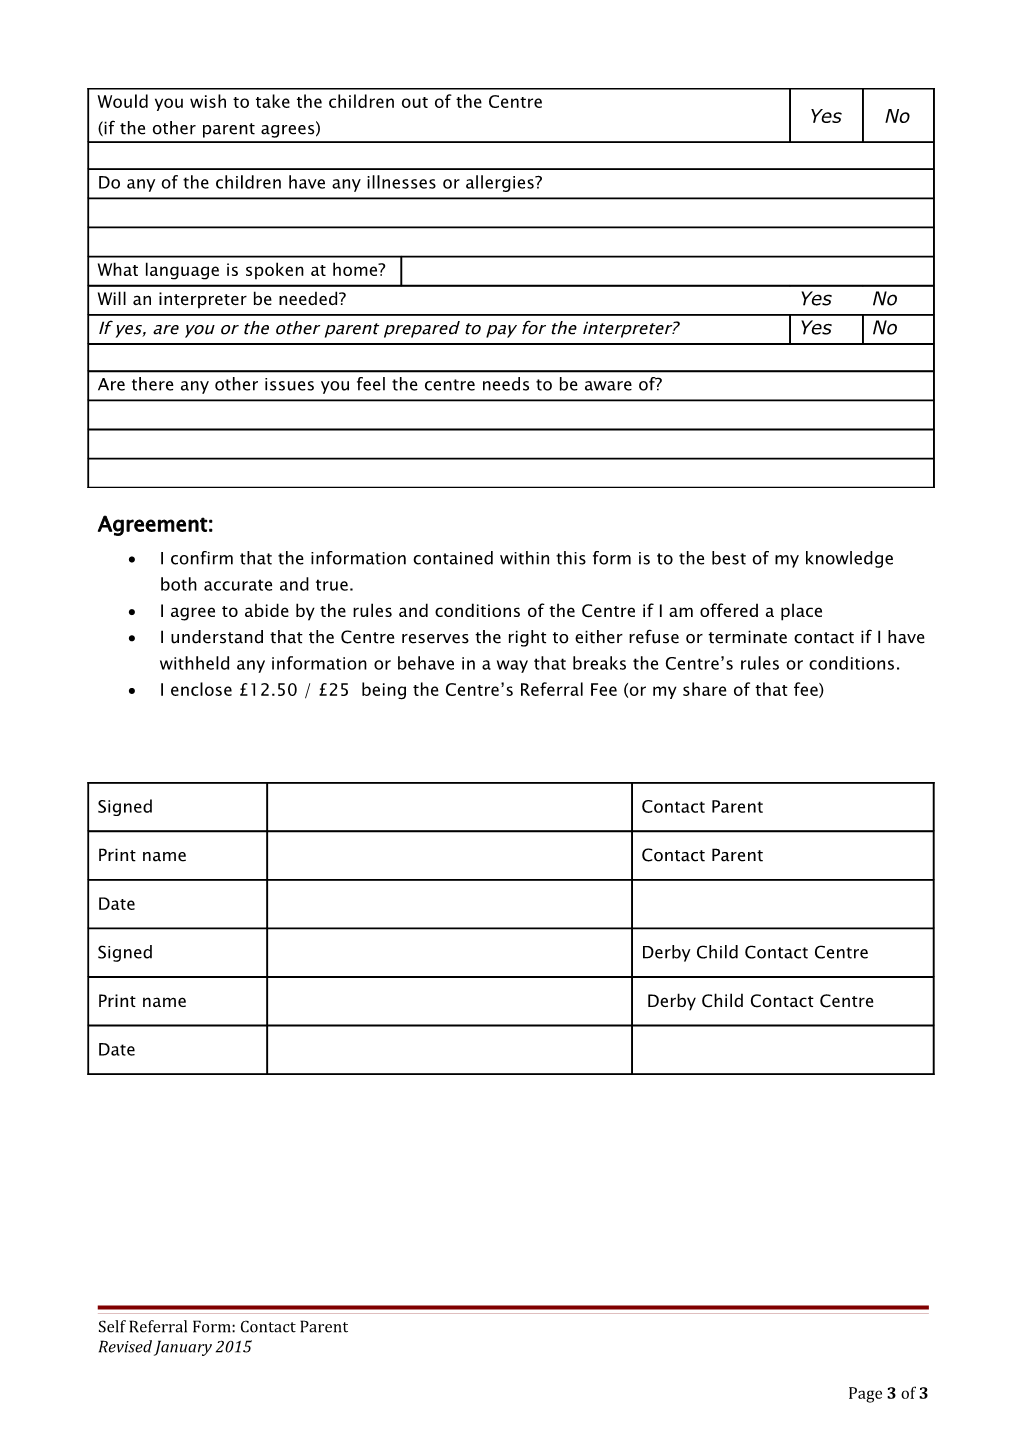 Self Referral Form and Agreement for Supported Contact